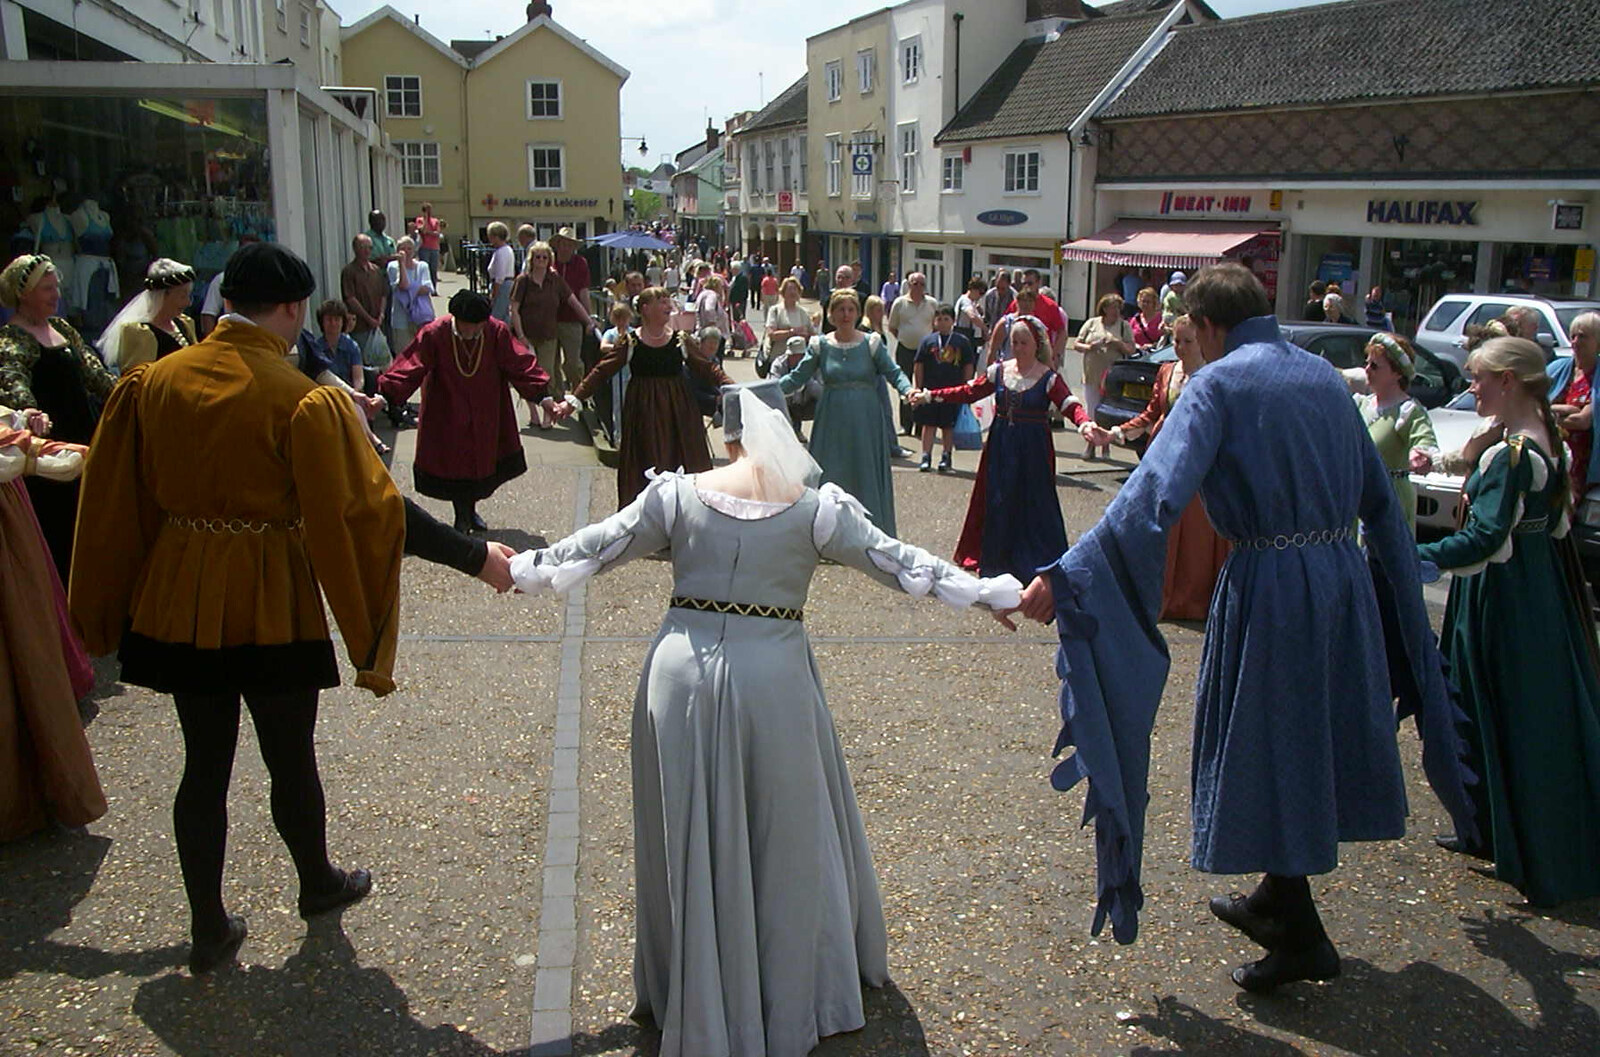 A ring of dancers on the market place from Andrey Leaves Trigenix, More Skelton Festival and a Transit of Venus, Cambridge and Diss - 4th June 2004